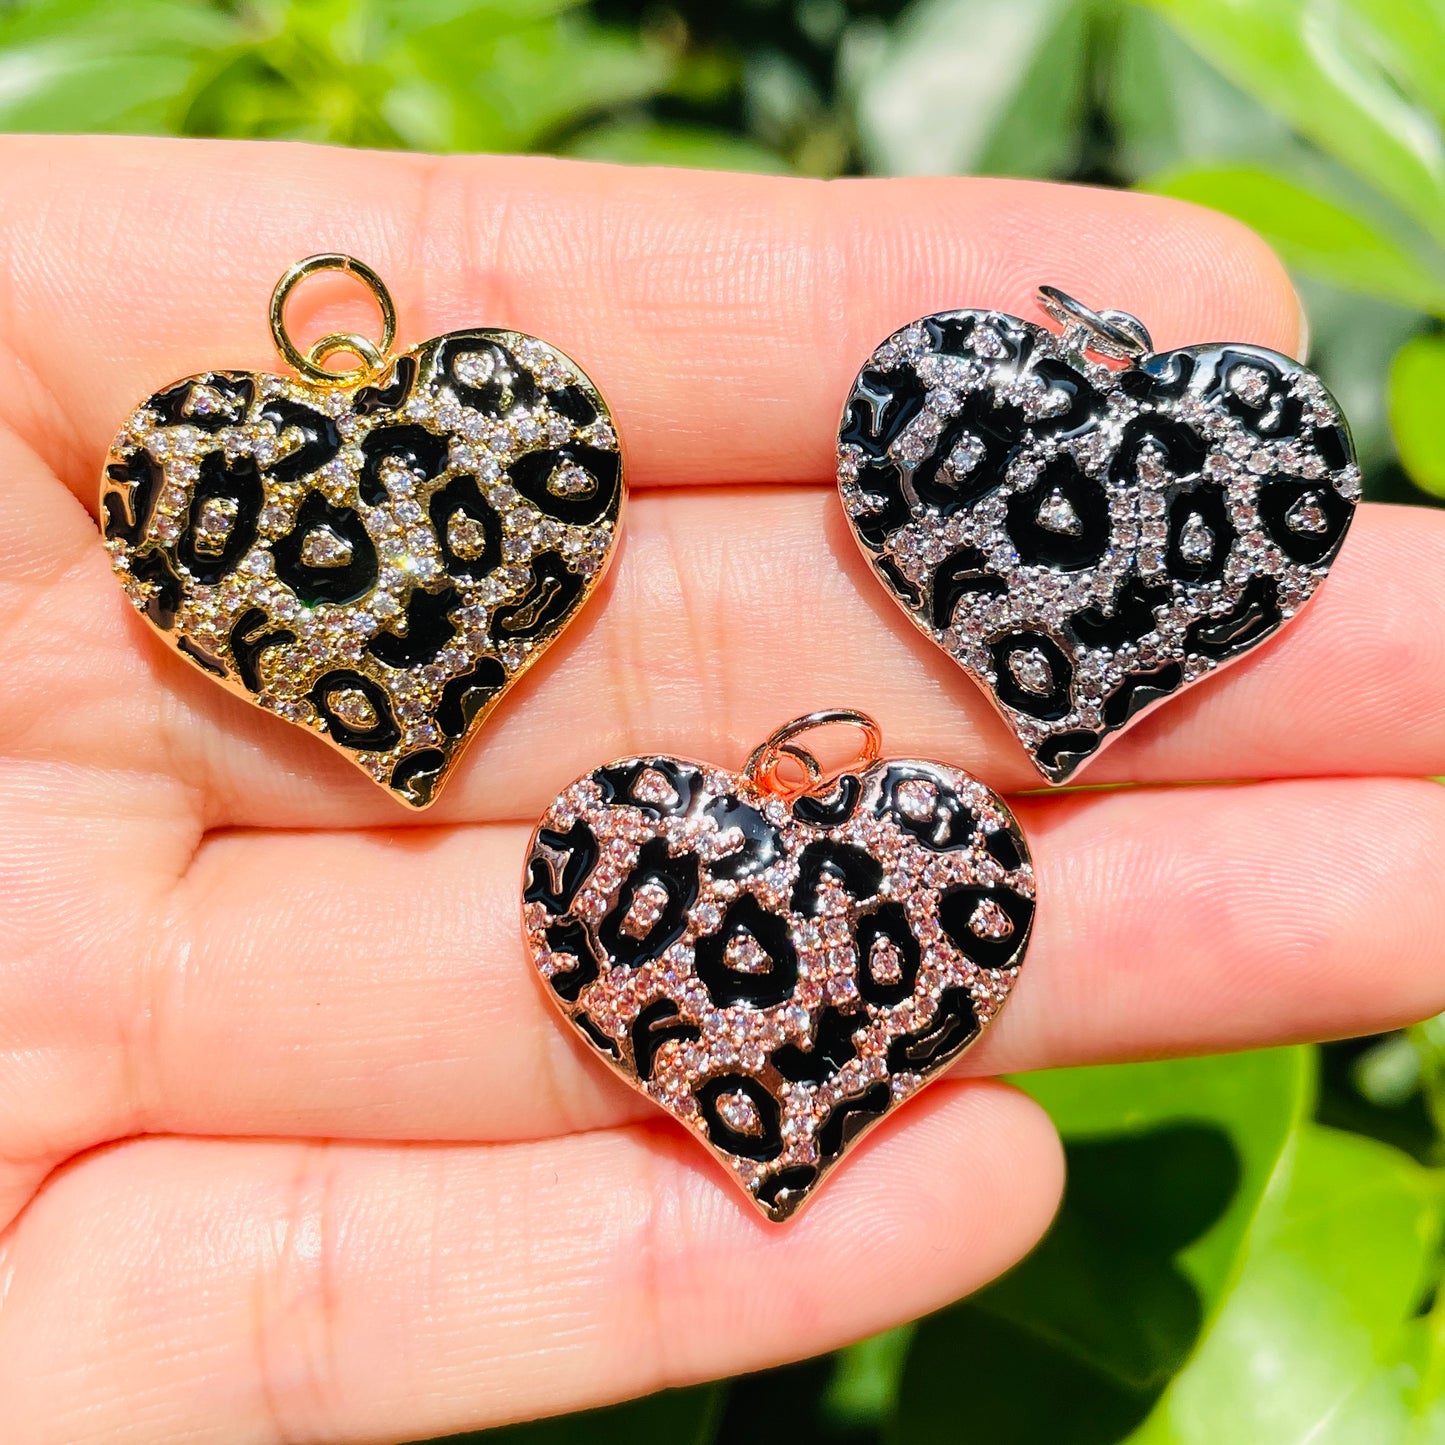 10pcs/lot 24.5*22mm CZ Paved Black Leopard Print Heart Charm Pendants CZ Paved Charms Hearts Leopard Printed New Charms Arrivals Charms Beads Beyond